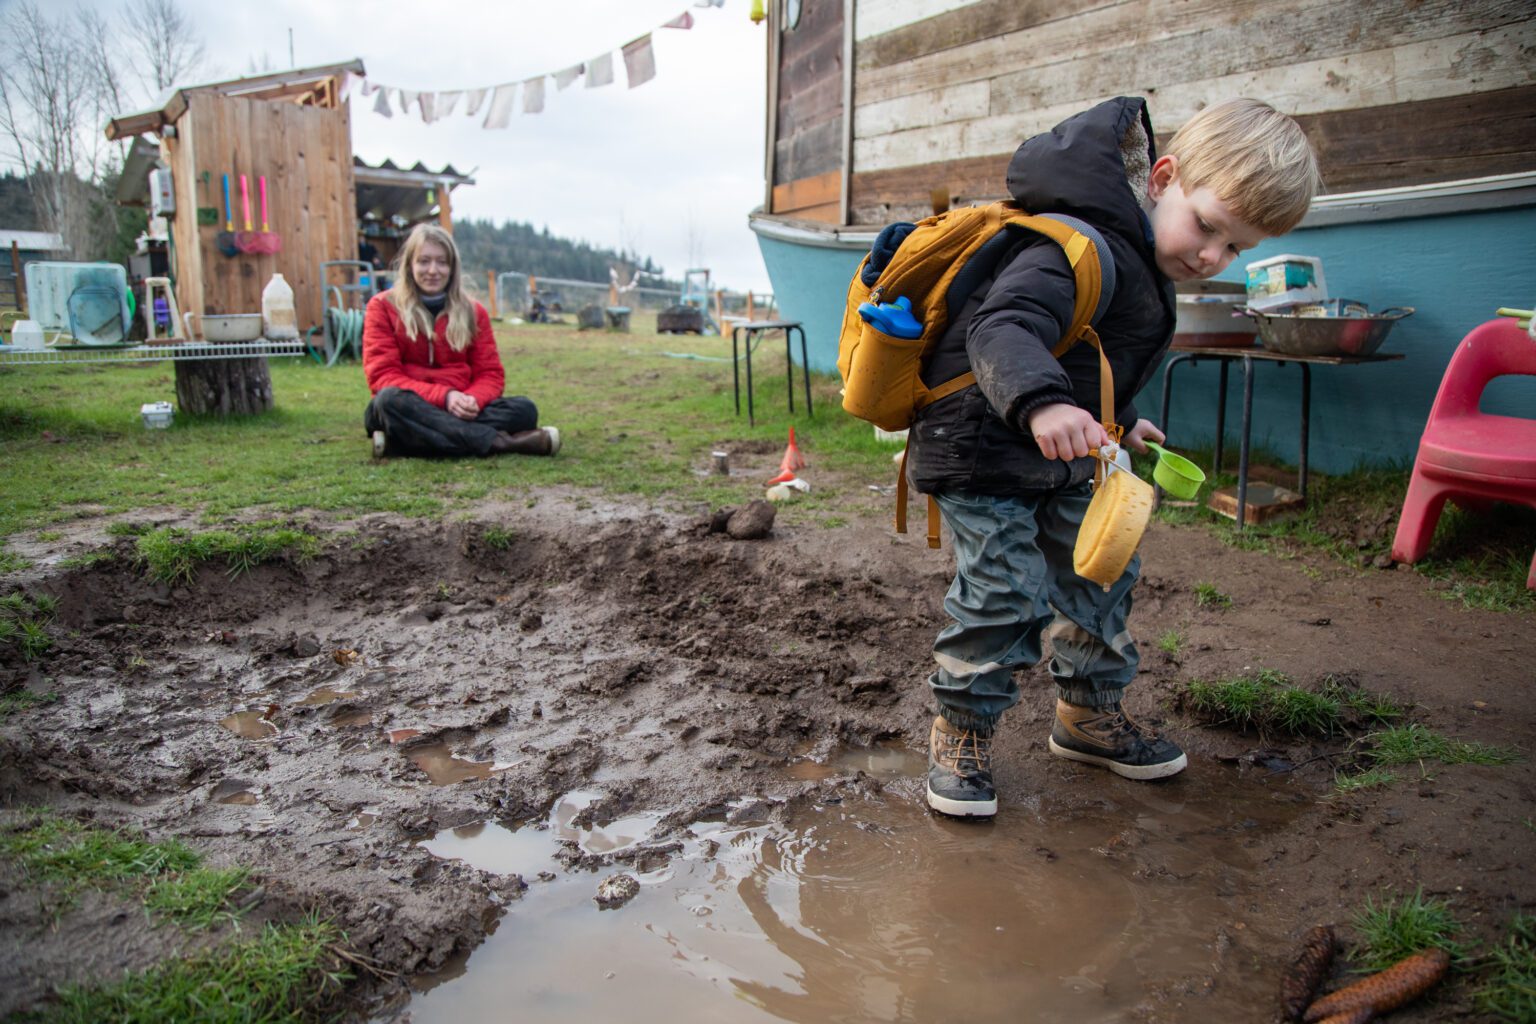 Teacher Lizzy Chandler watches as Mac plays in the mud pit.